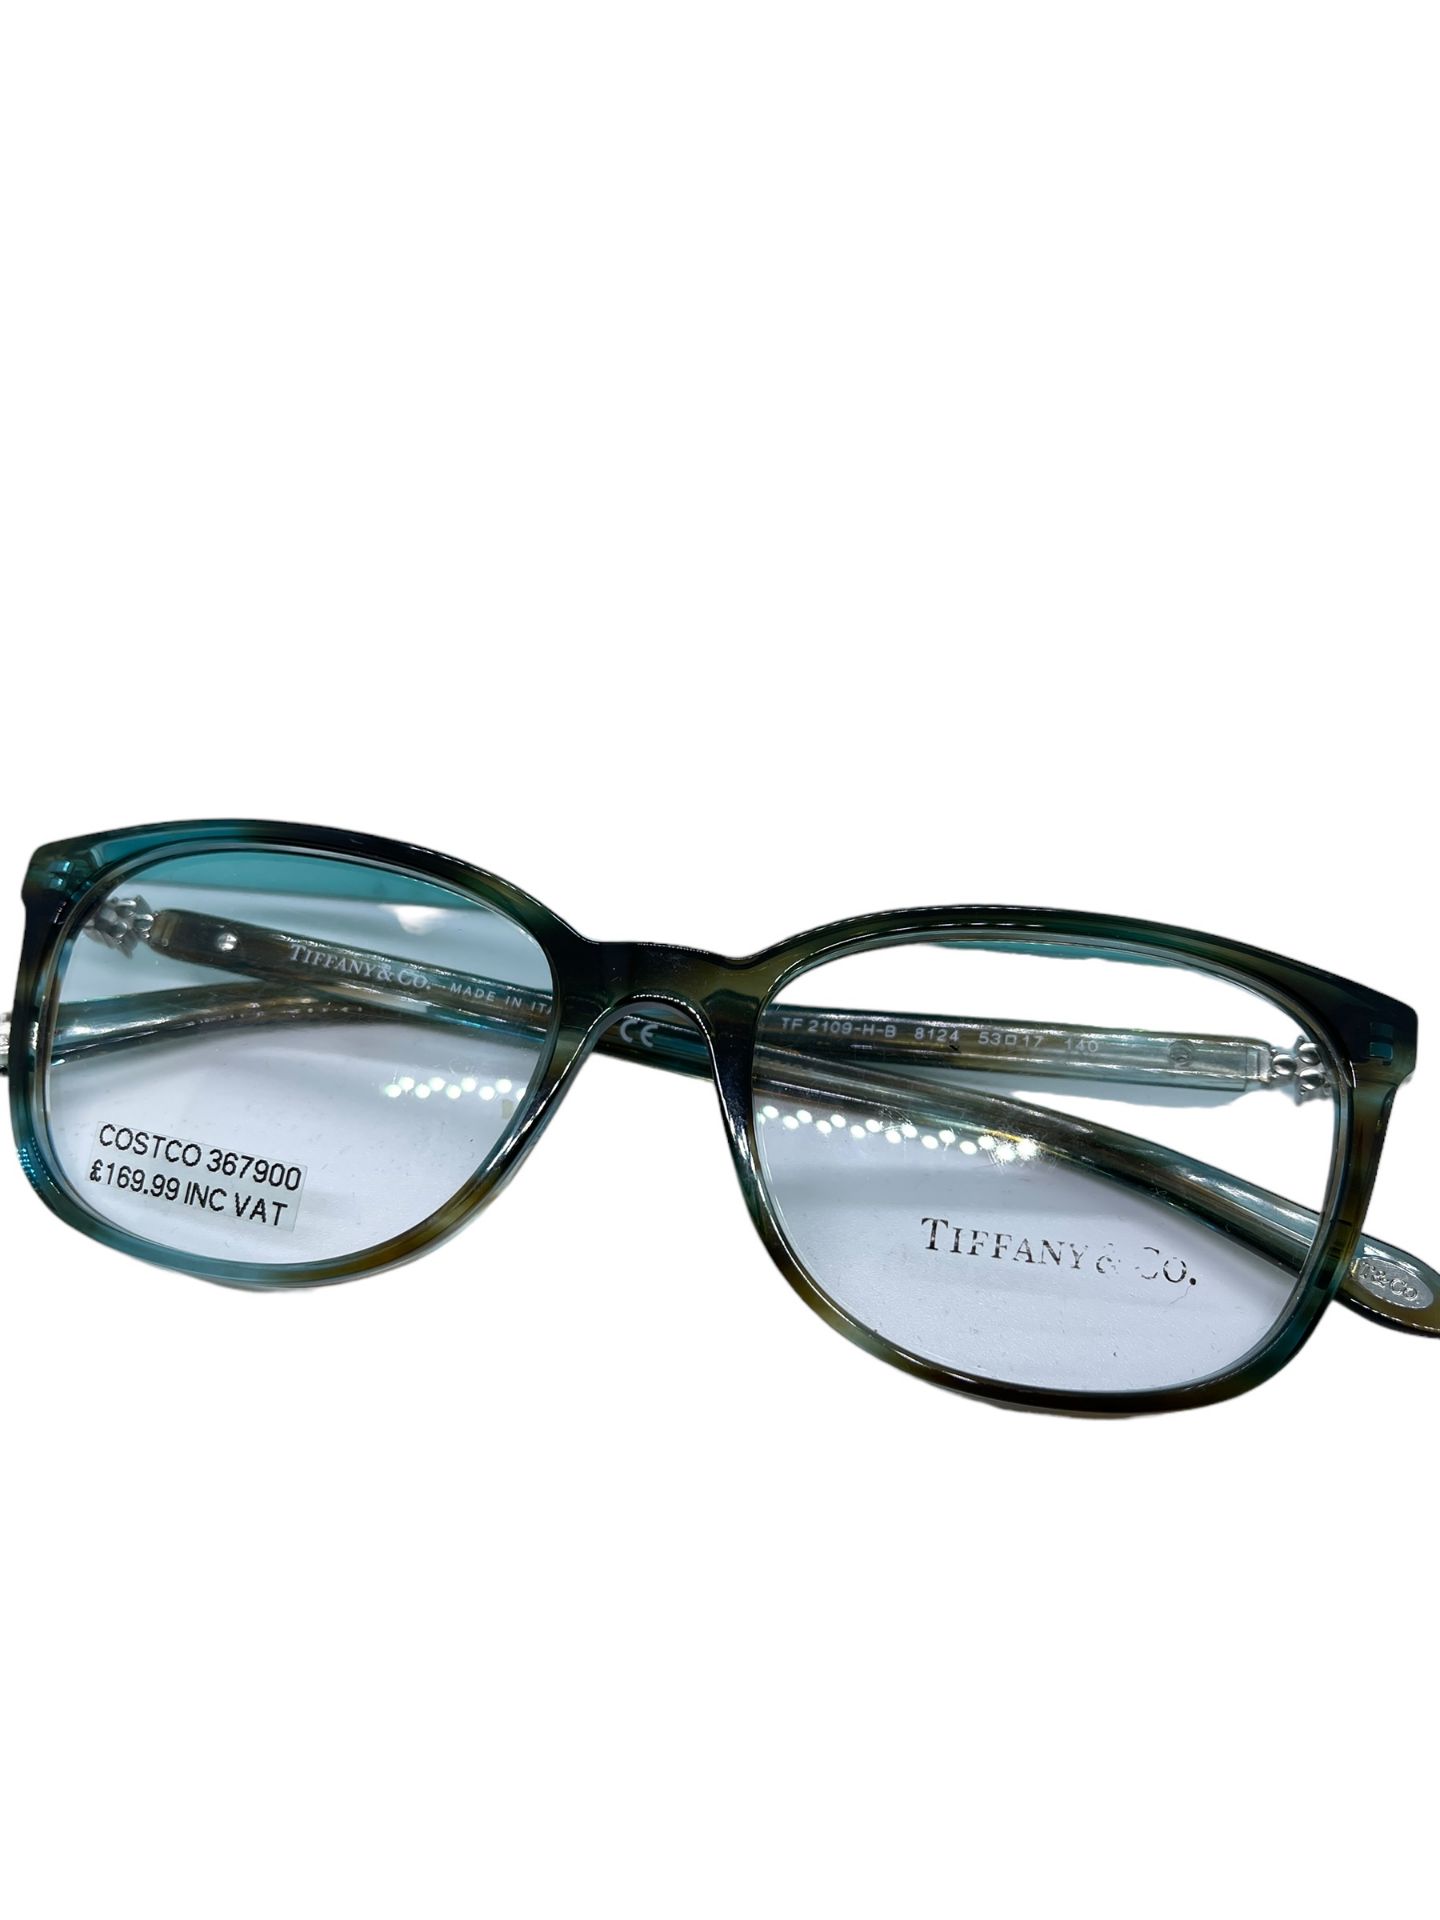 Tiffany spectacles demo ladies - Image 3 of 6